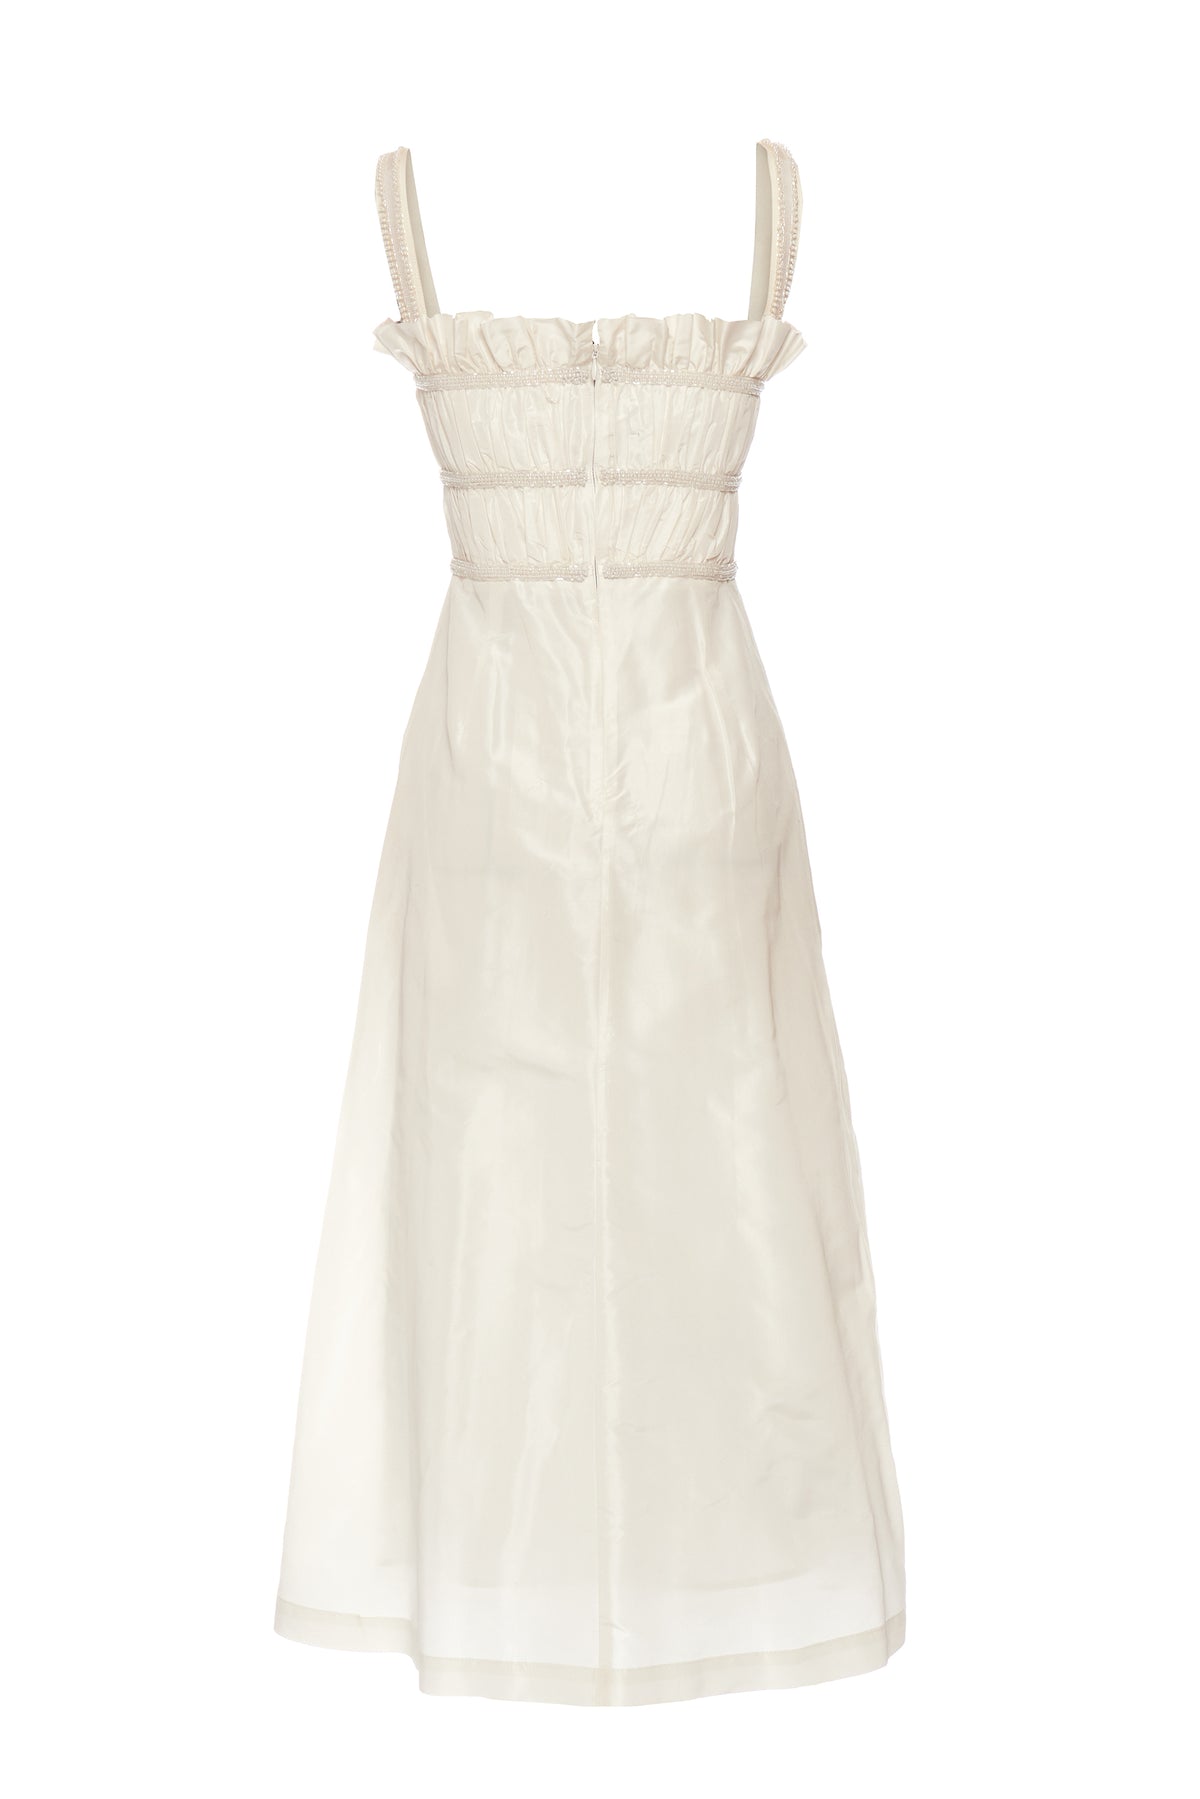 Willie Dress in Ivory